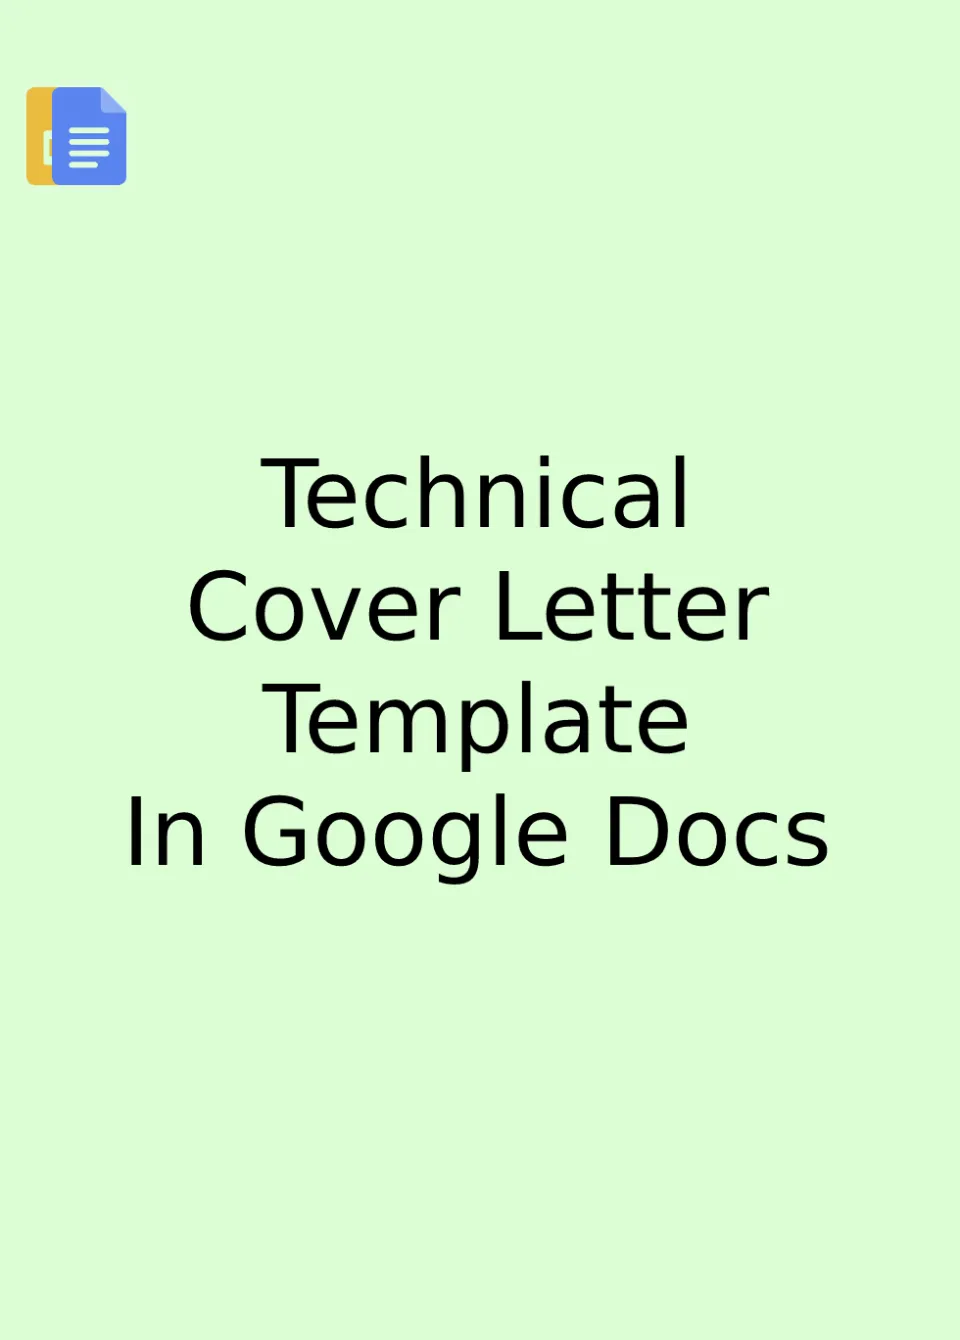 Technical Cover Letter Template Google Docs